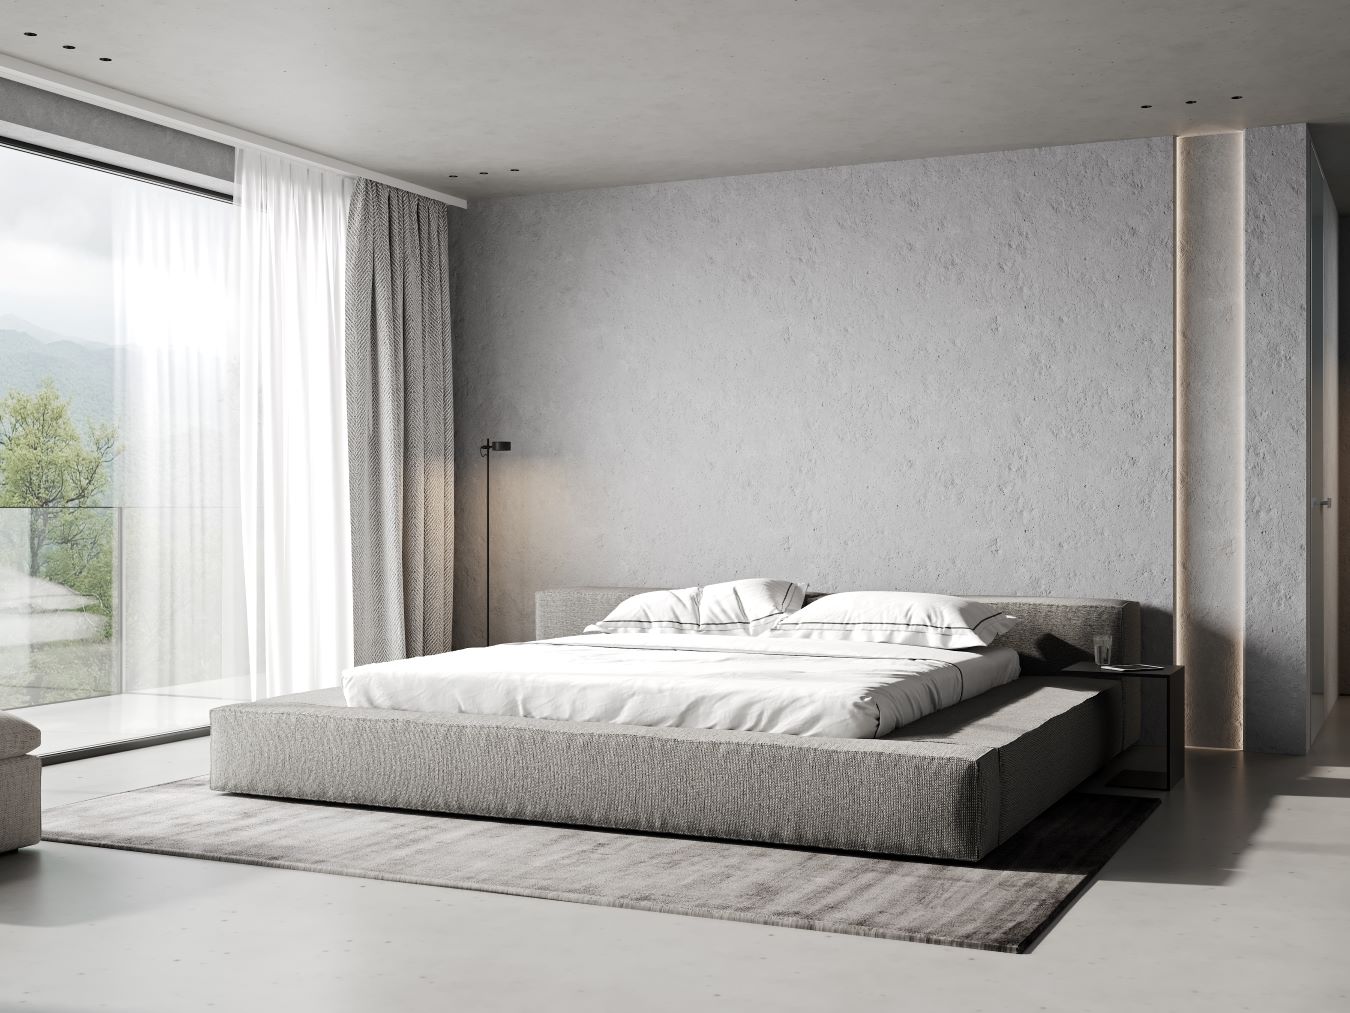 Luxurious Modern Light Grey & White Bedroom. | Featured image for Wenatex’s Silver Bedding Blog.